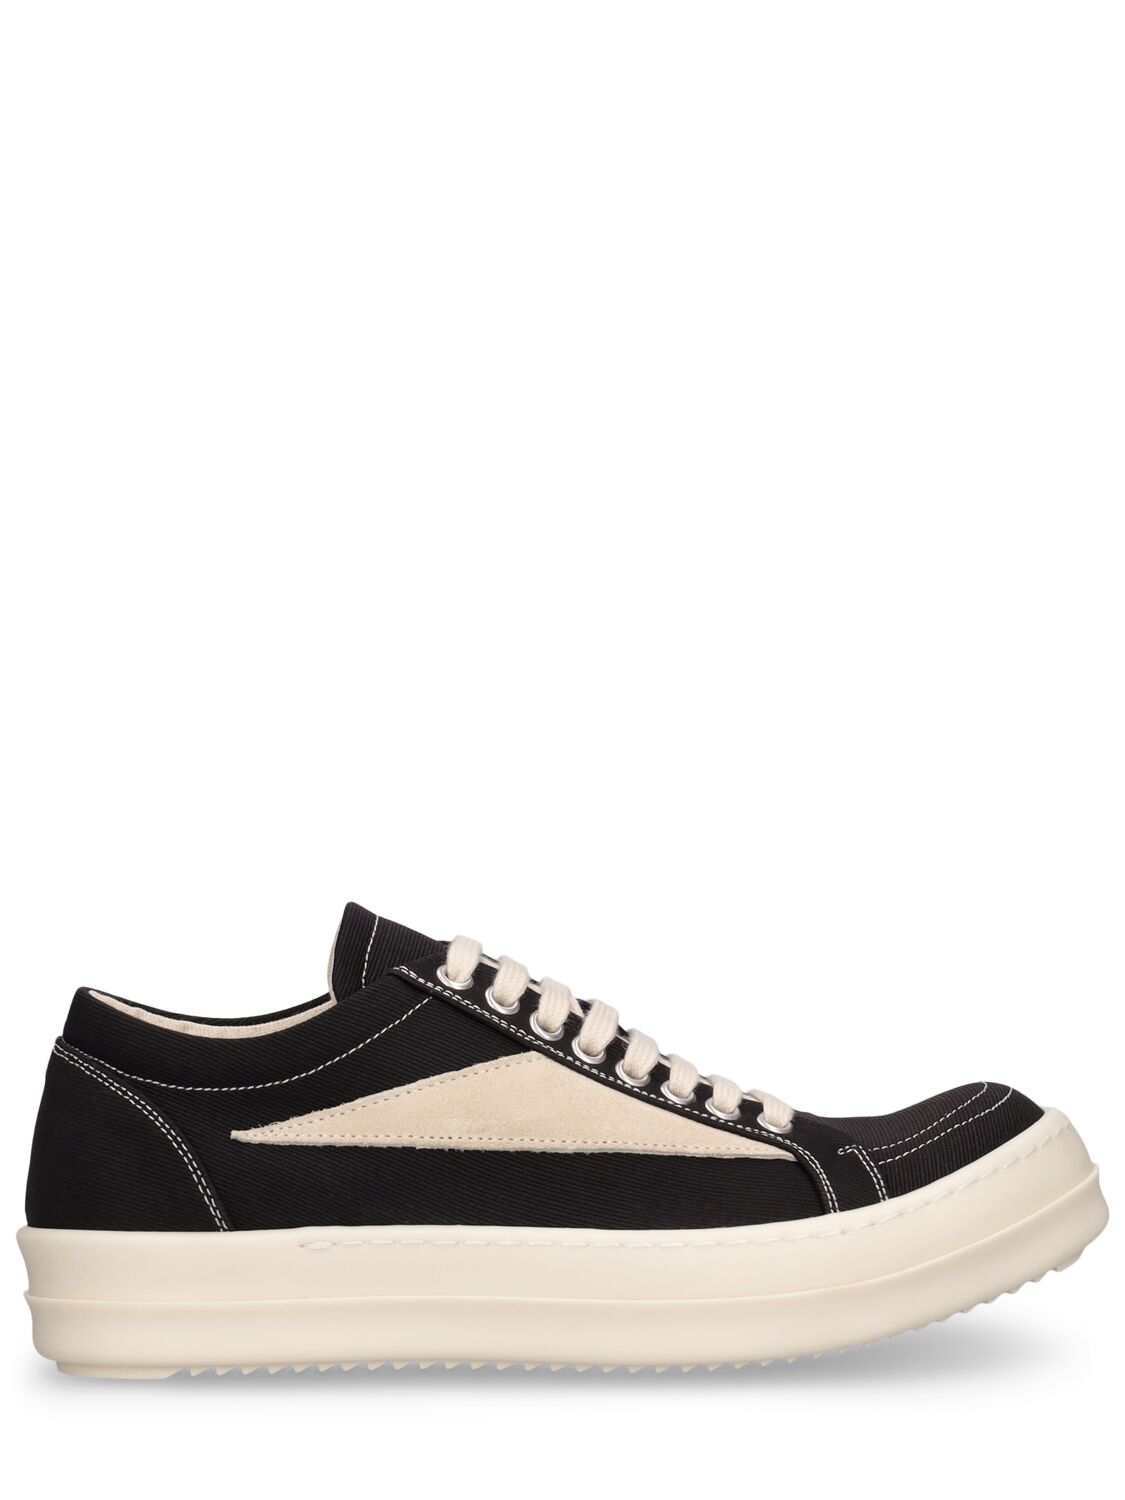 Image of Vintage Canvas Sneakers